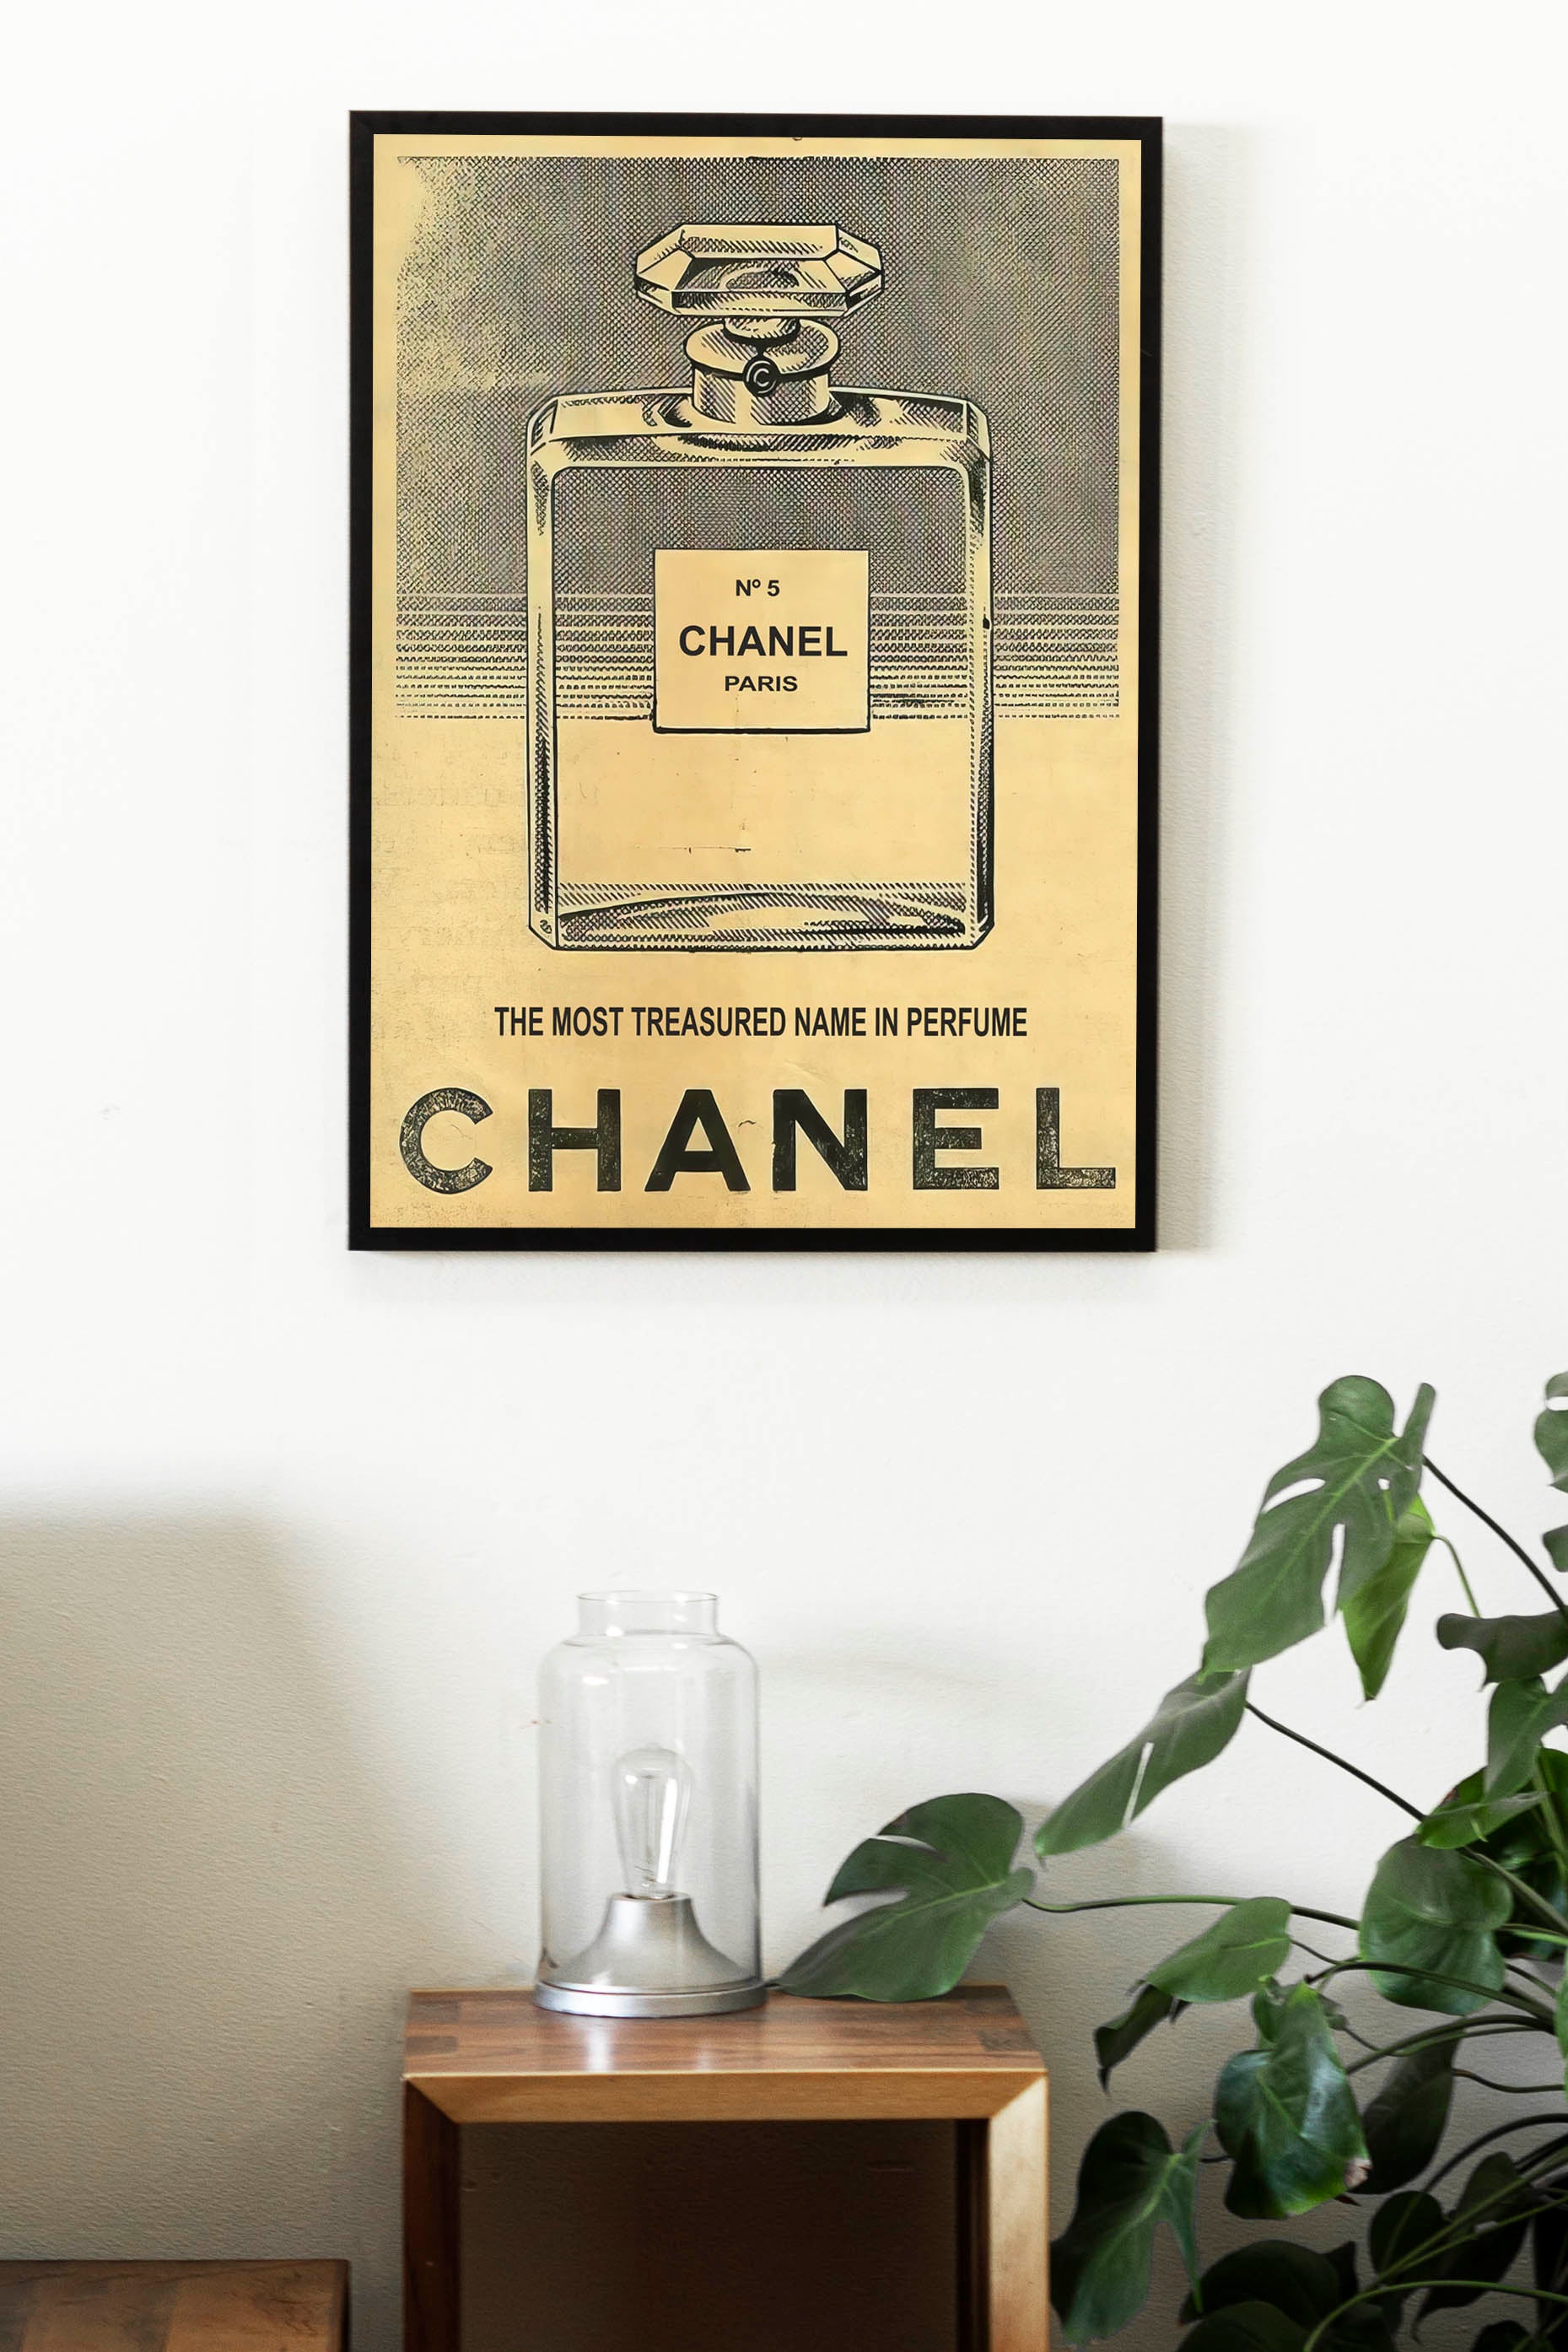 Chanel No 5 Perfume Advertising Poster, 50's Style Print, Ad Wall Art,  Vintage Design Magazine, Luxury Fashion Ads Poster – Yesterday Vault